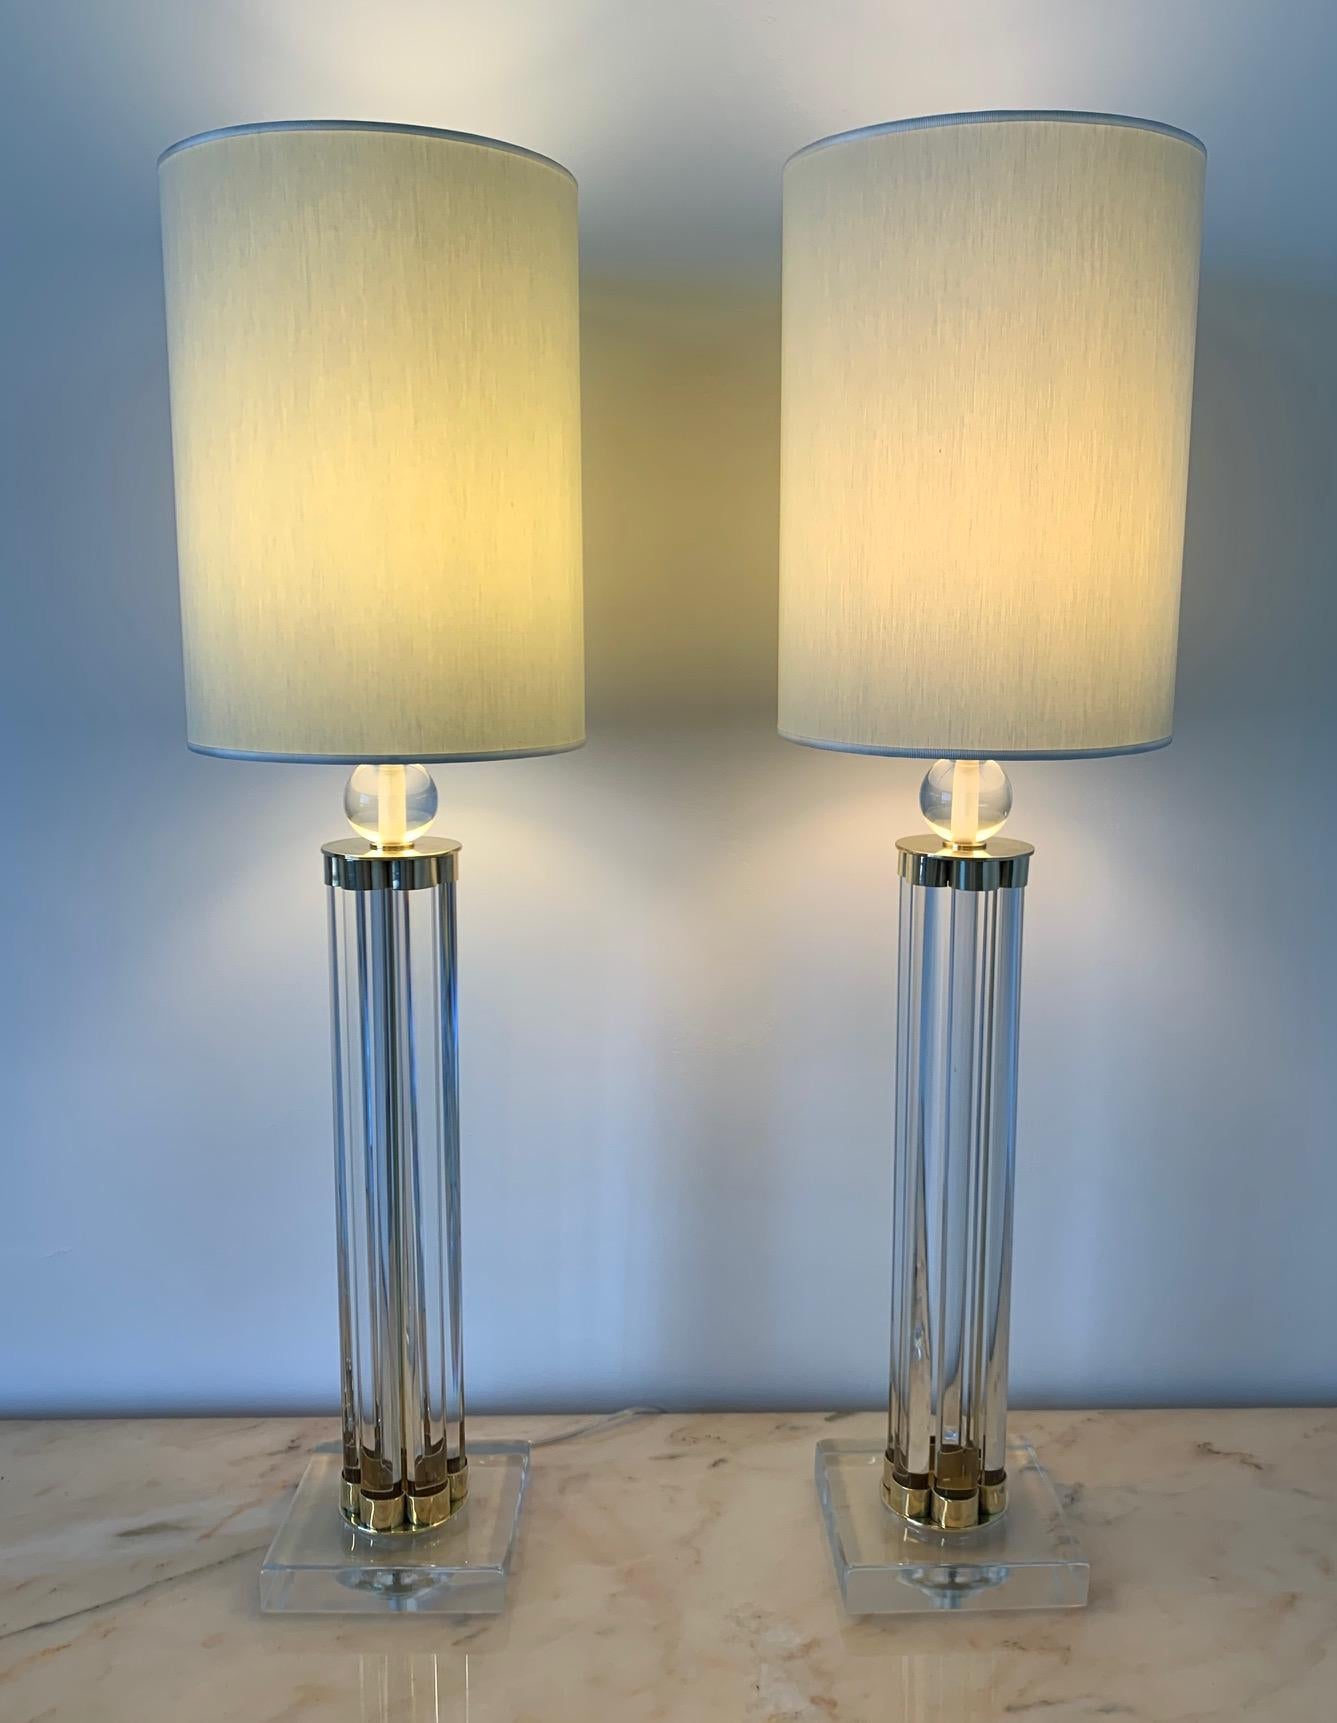 This pair of Murano lamps was produced in Italy in the early 2000s.
The lamps are completely in Murano glass and brass details.